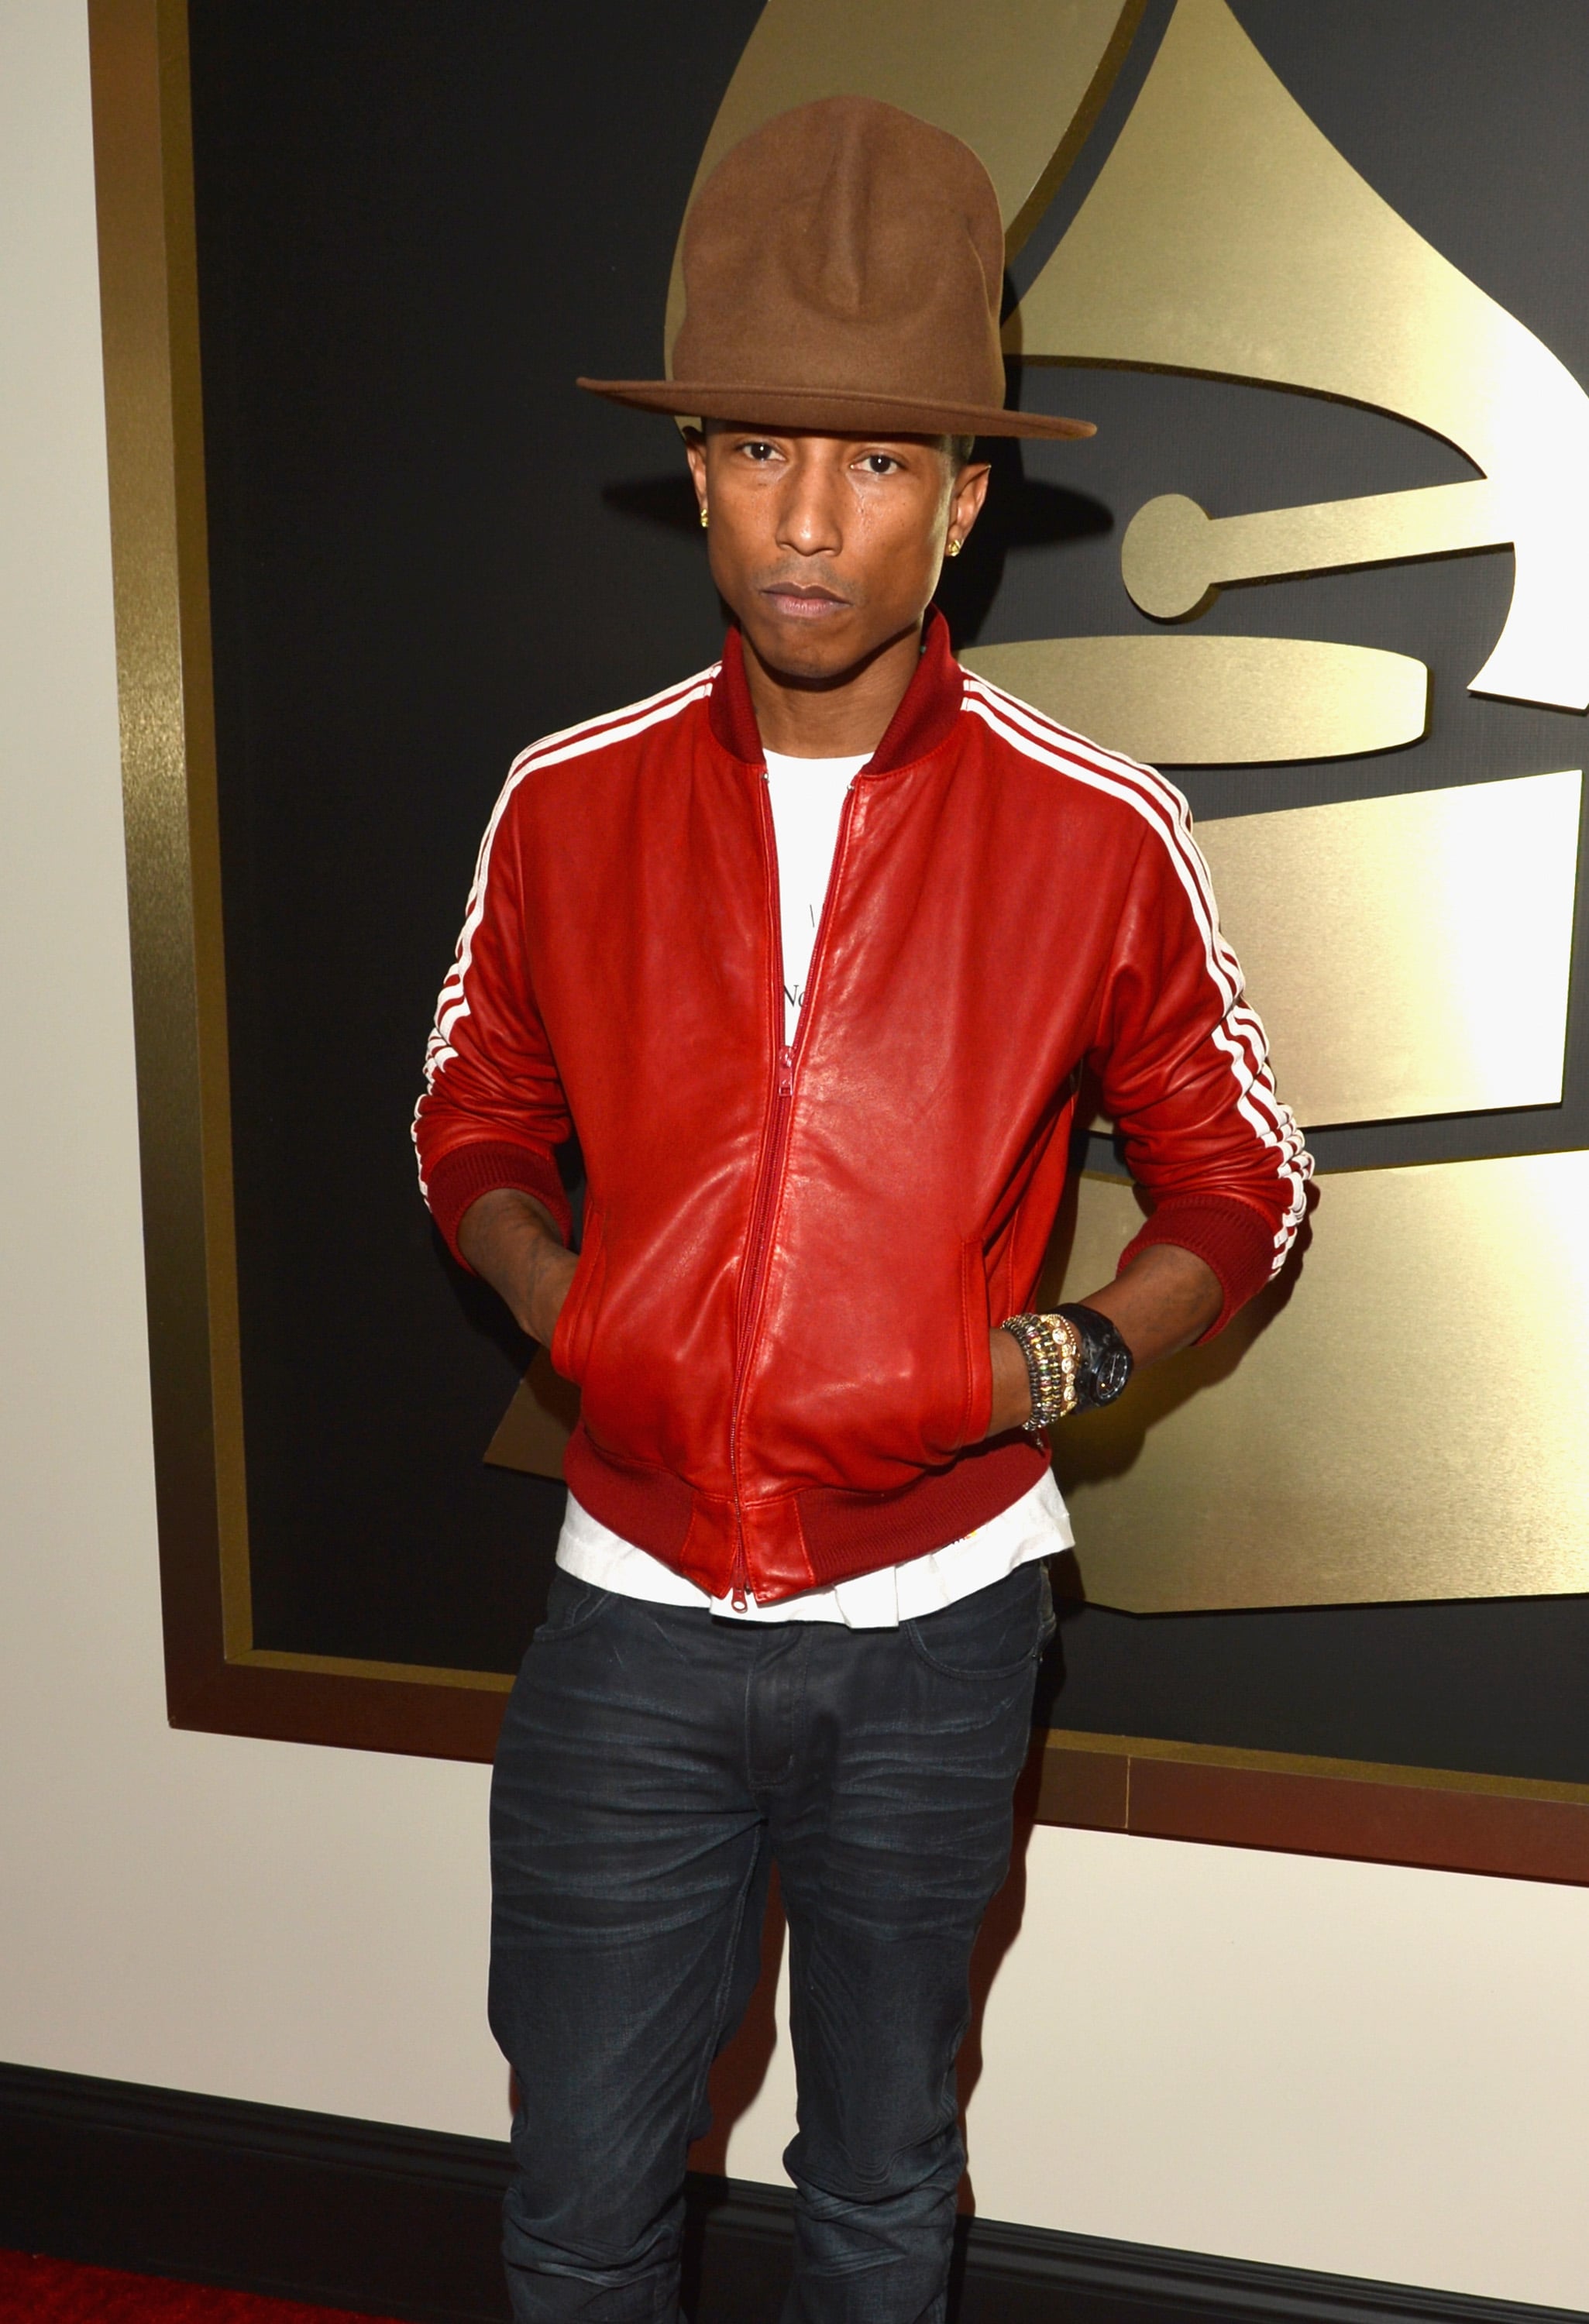 Pharrell Williams' crazy hat steals the show at Grammy Awards 2014